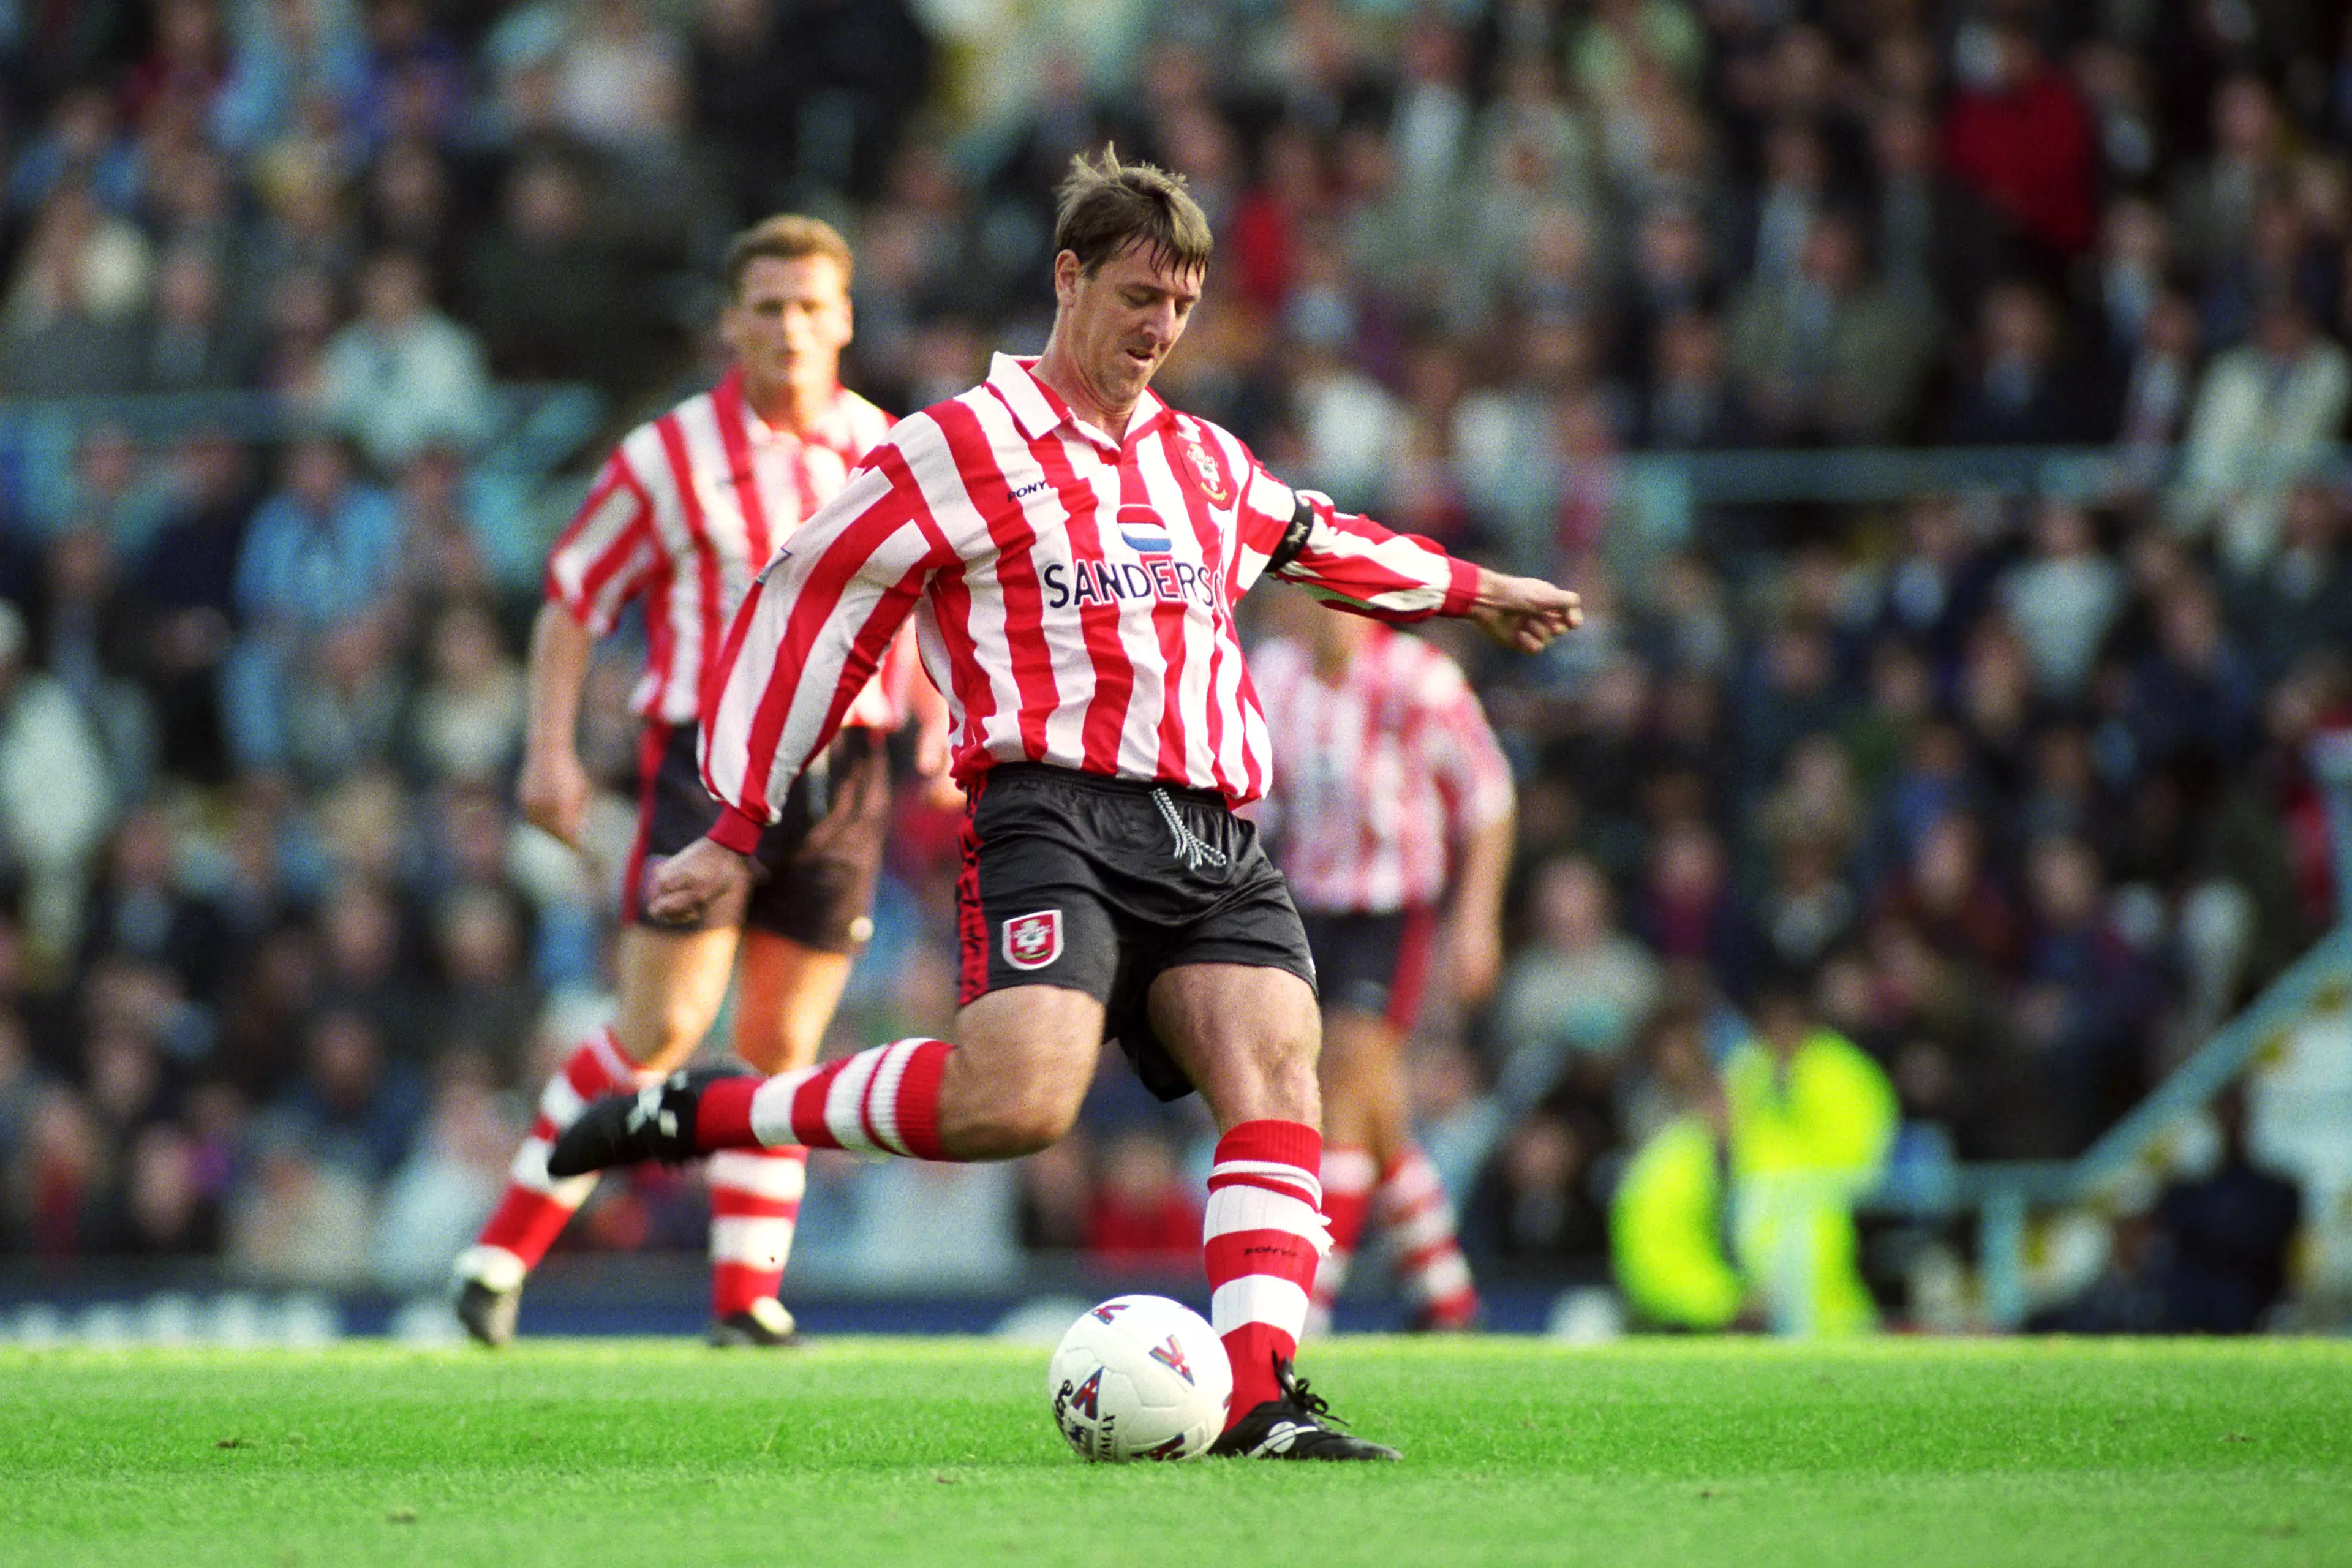 Le Tissier spent 16 years of his career with Southampton. (Image